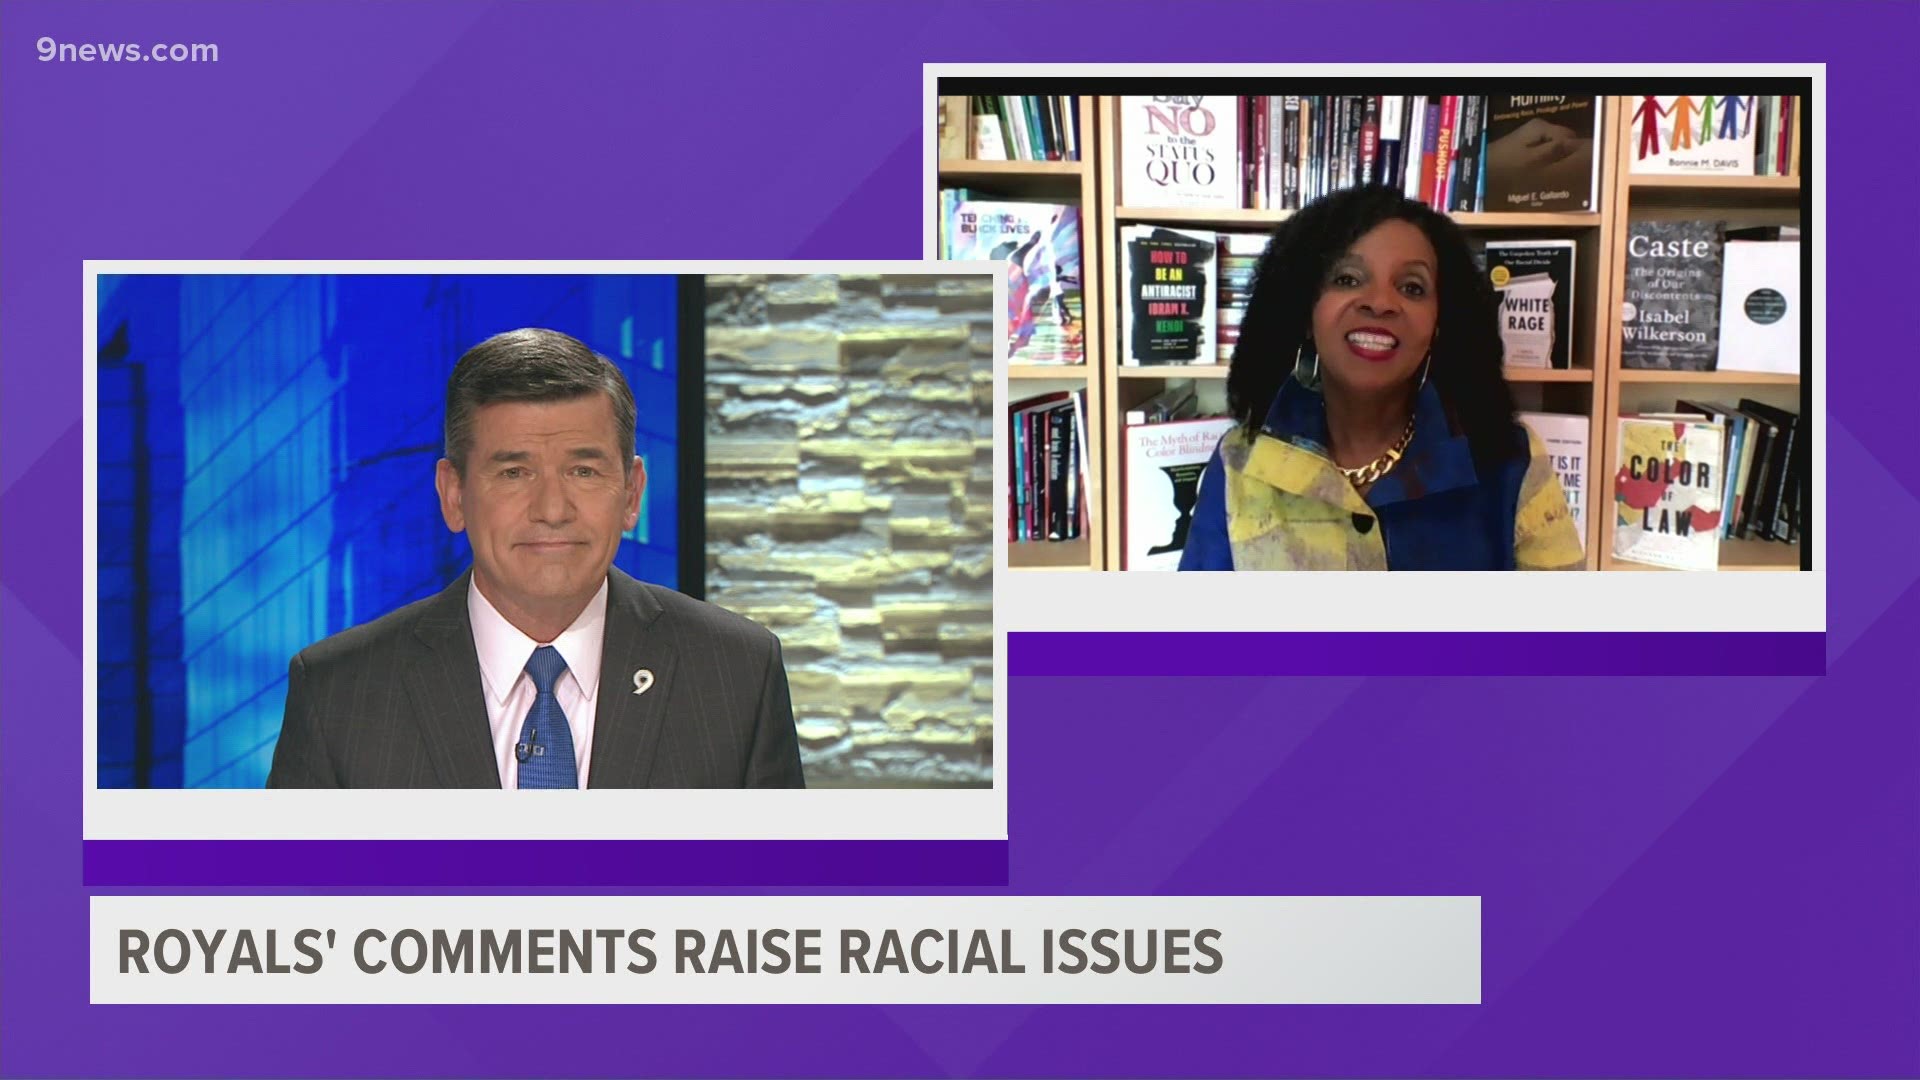 Oprah's interview with Prince Harry and Meghan Markle included allegations of racism within the royal family. Racial equity expert Dr. Rosemarie Allen weighs in.